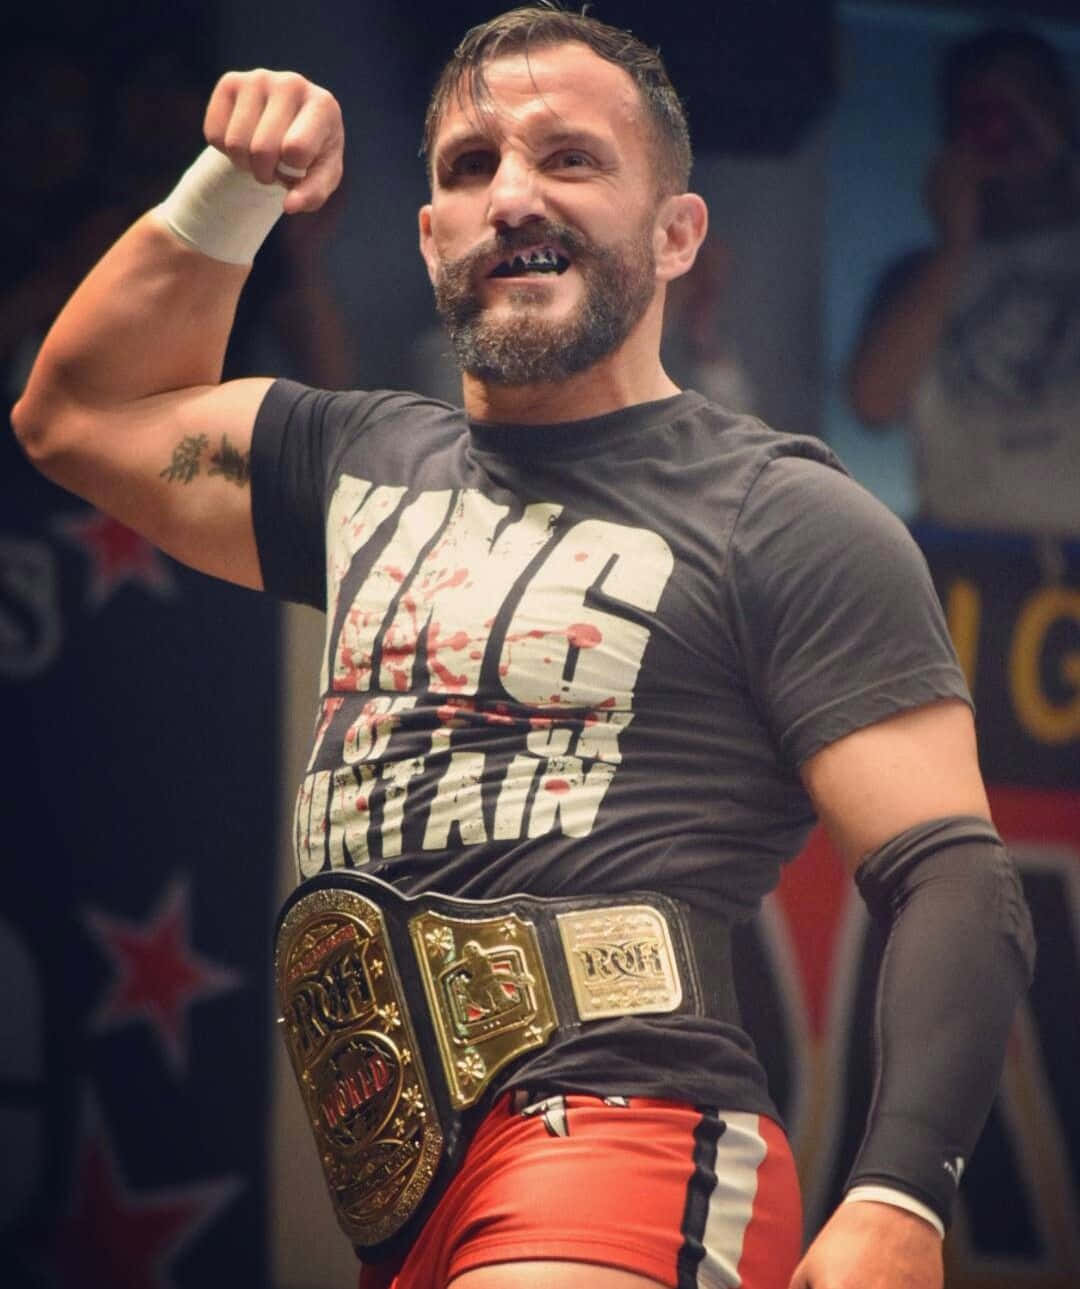 Professional wrestler Bobby Fish making a dynamic move in the ring. Wallpaper